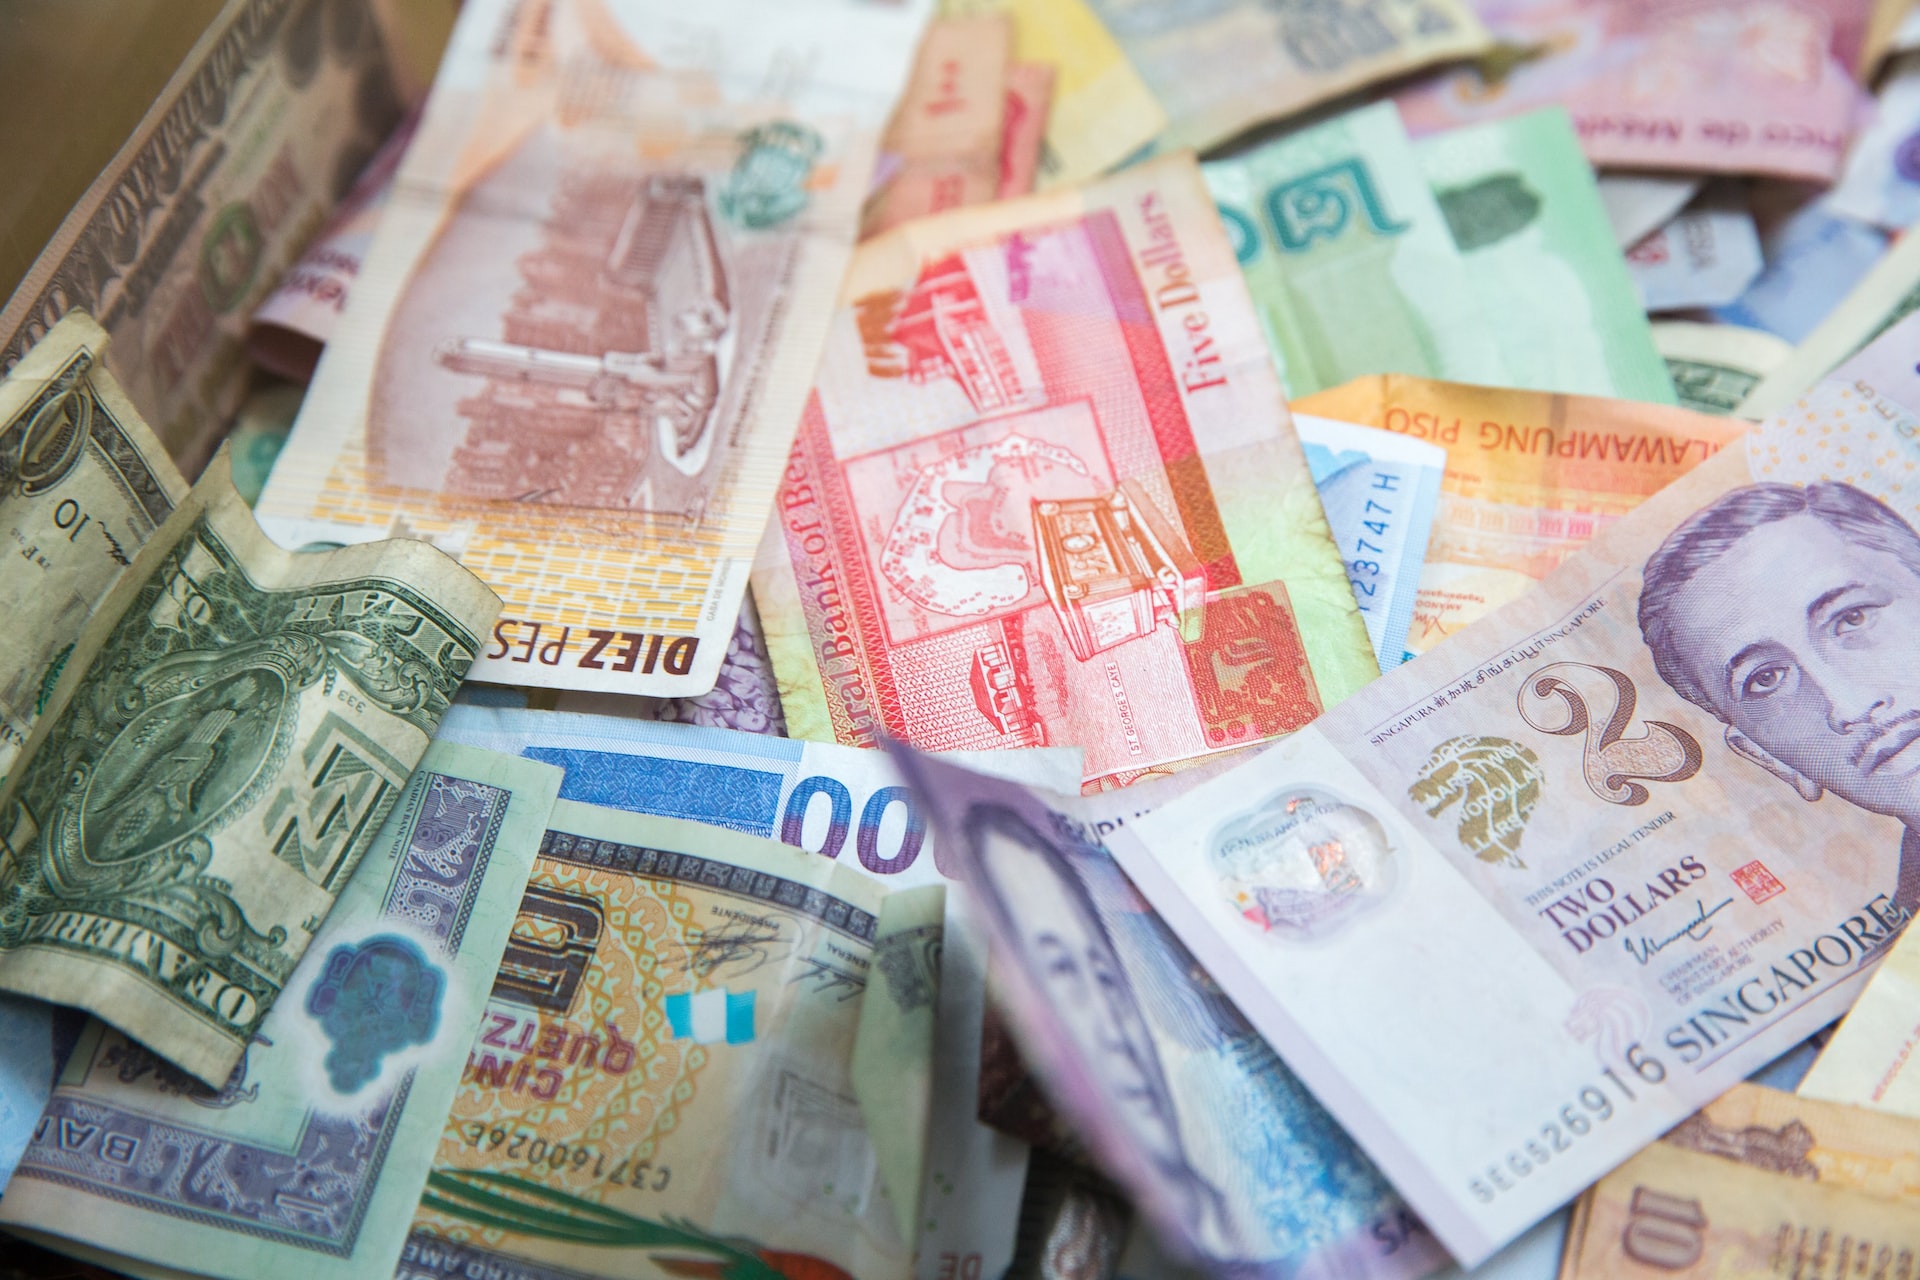 Not budgeting wisely is a common travel mistake to avoid. Pictured: various currencies (photo: Jason Leung)